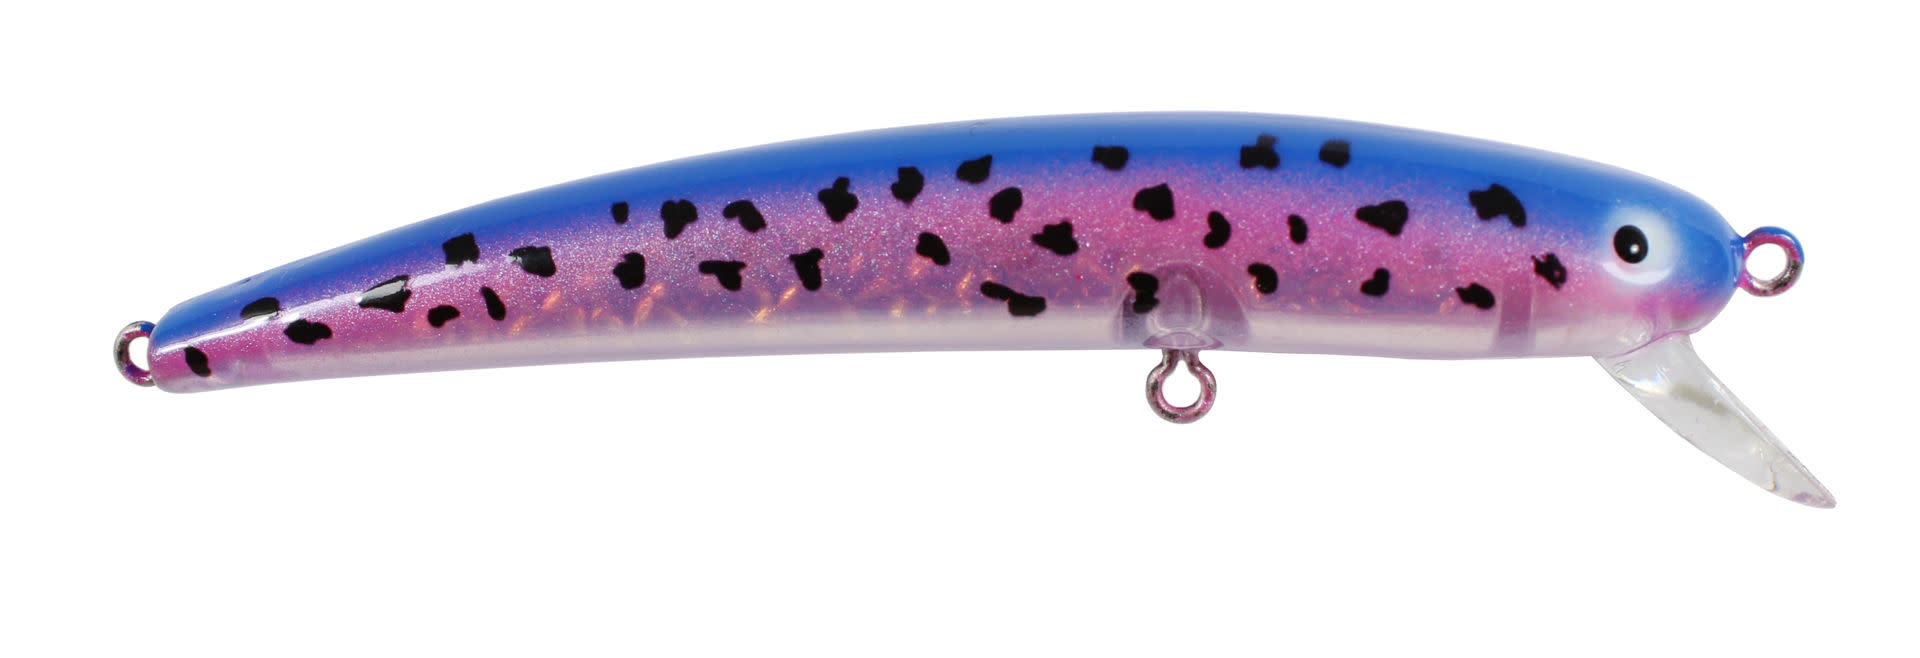 BAY RAT LURES TRIPLE S EXCLUSIVE LONG SHALLOW 4 38 3-5 DEPTH 716OZ DIRTY  COTTON CANDY MFG# 26530